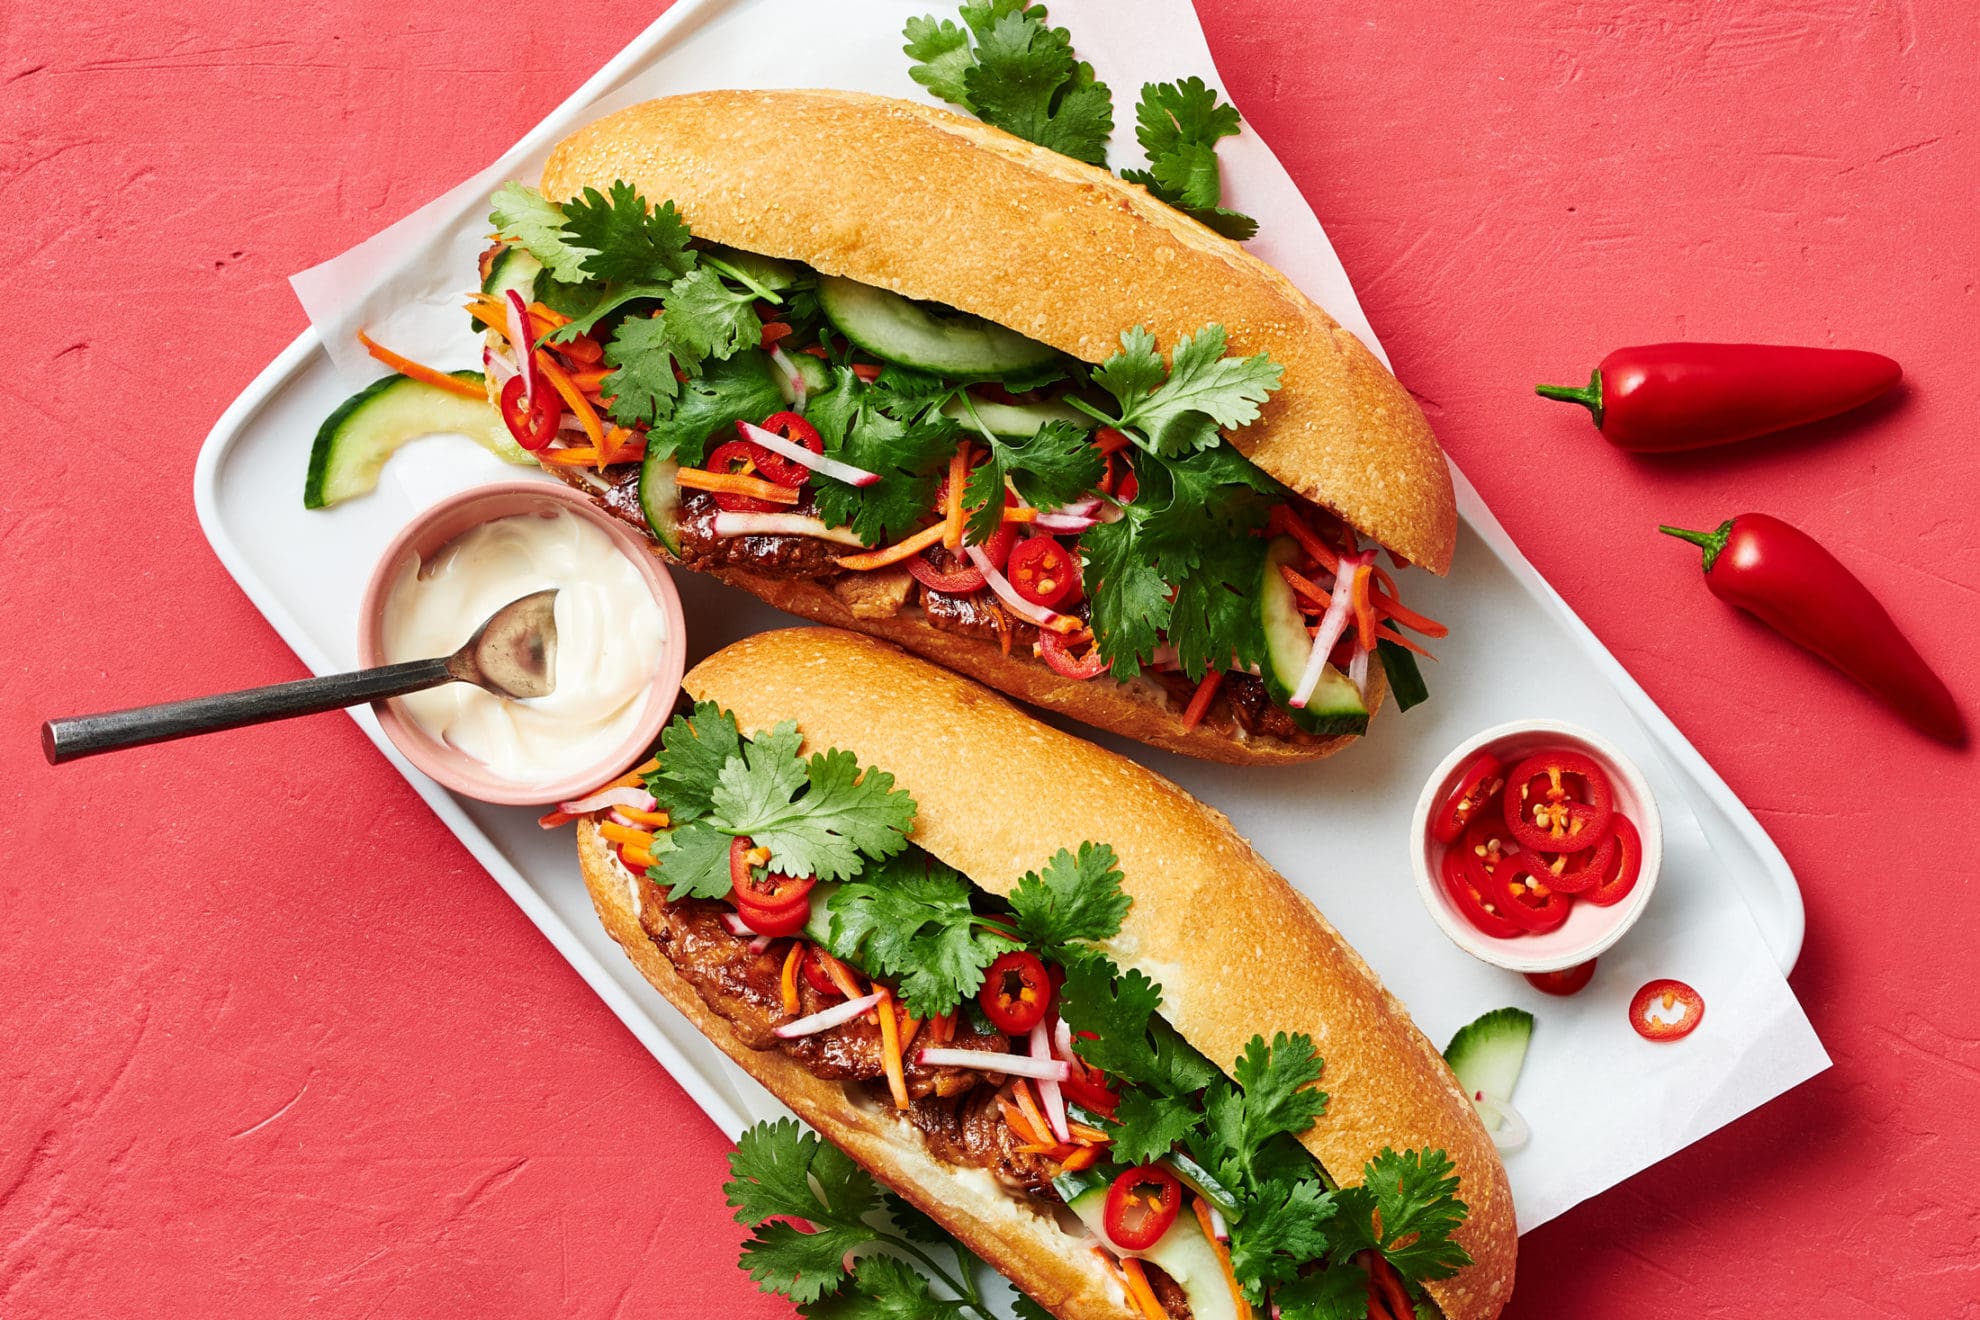 Chicken and YOWZERS!™ Banh Mi Sandwich - SUNSET Grown. All rights reserved.